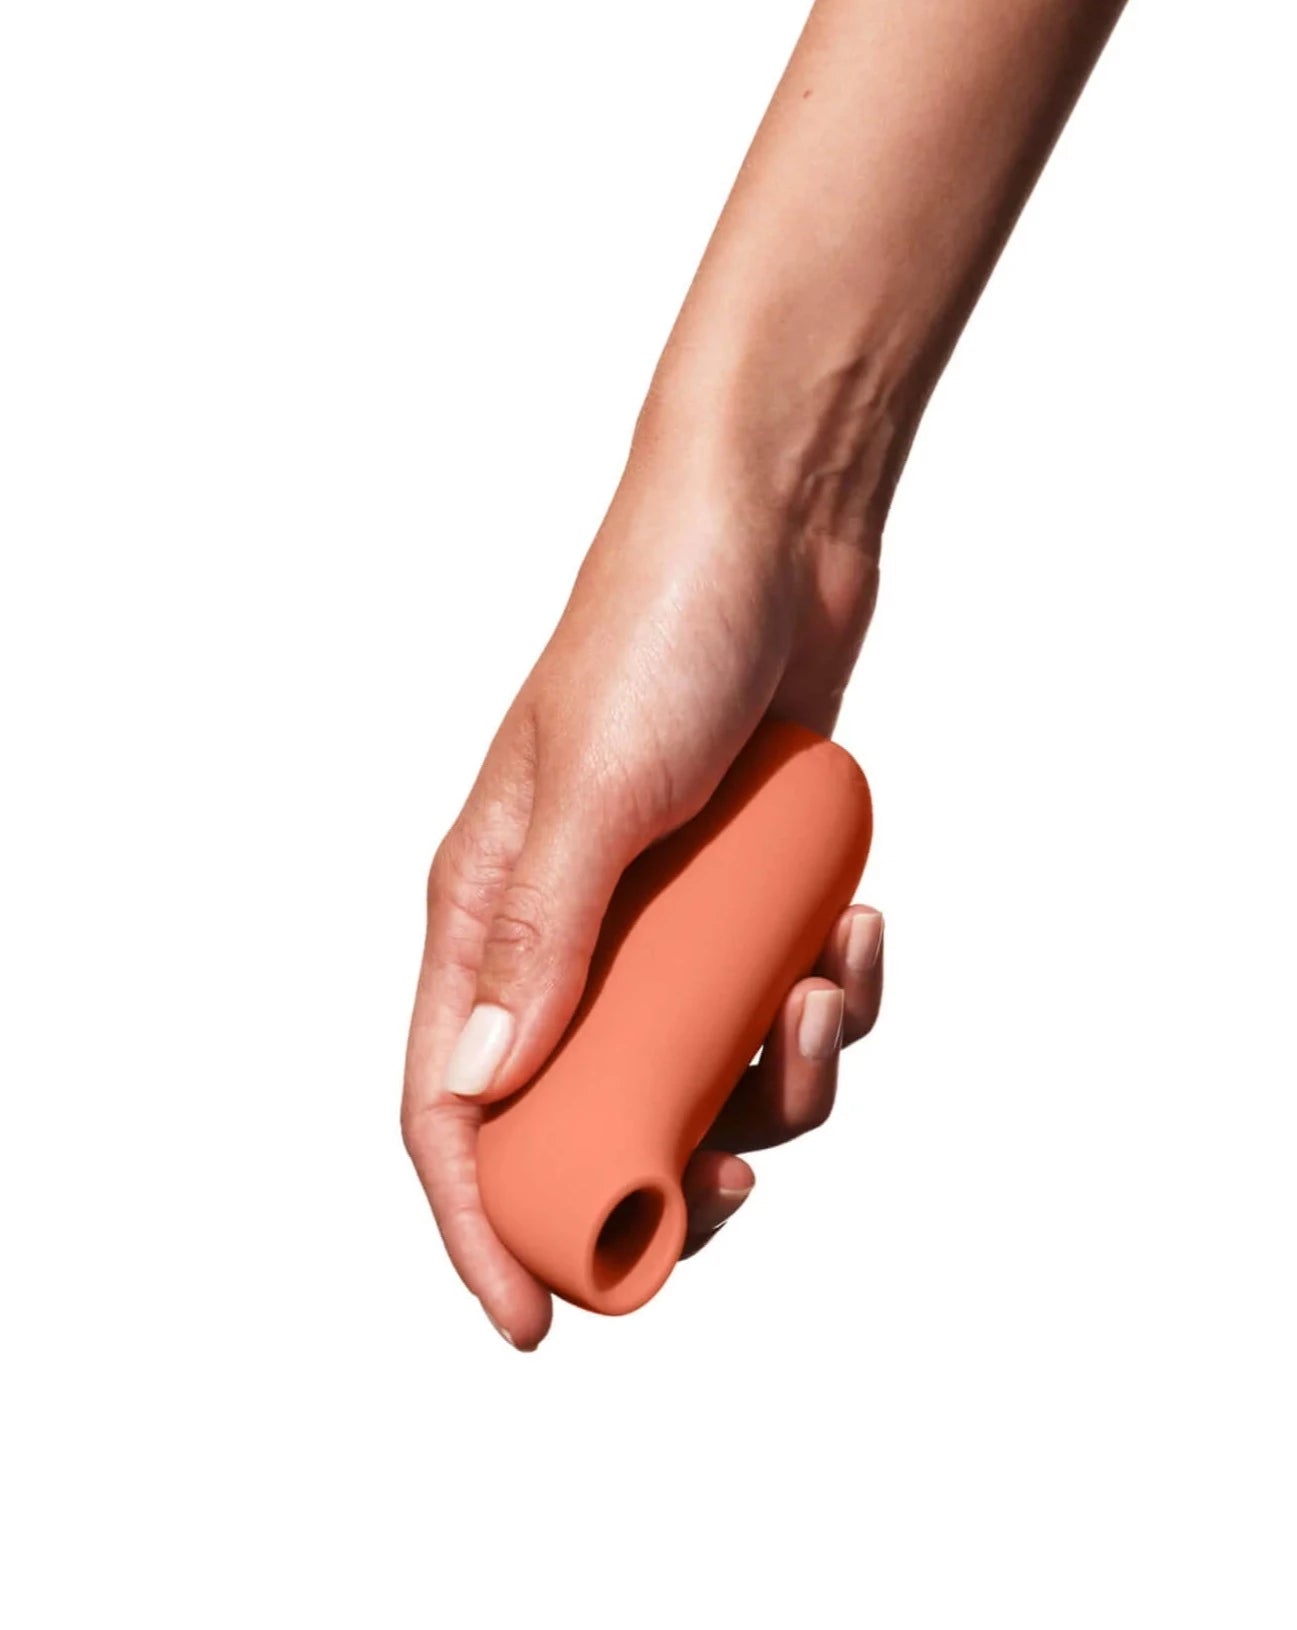 Dame suction toy available at Ease Toronto